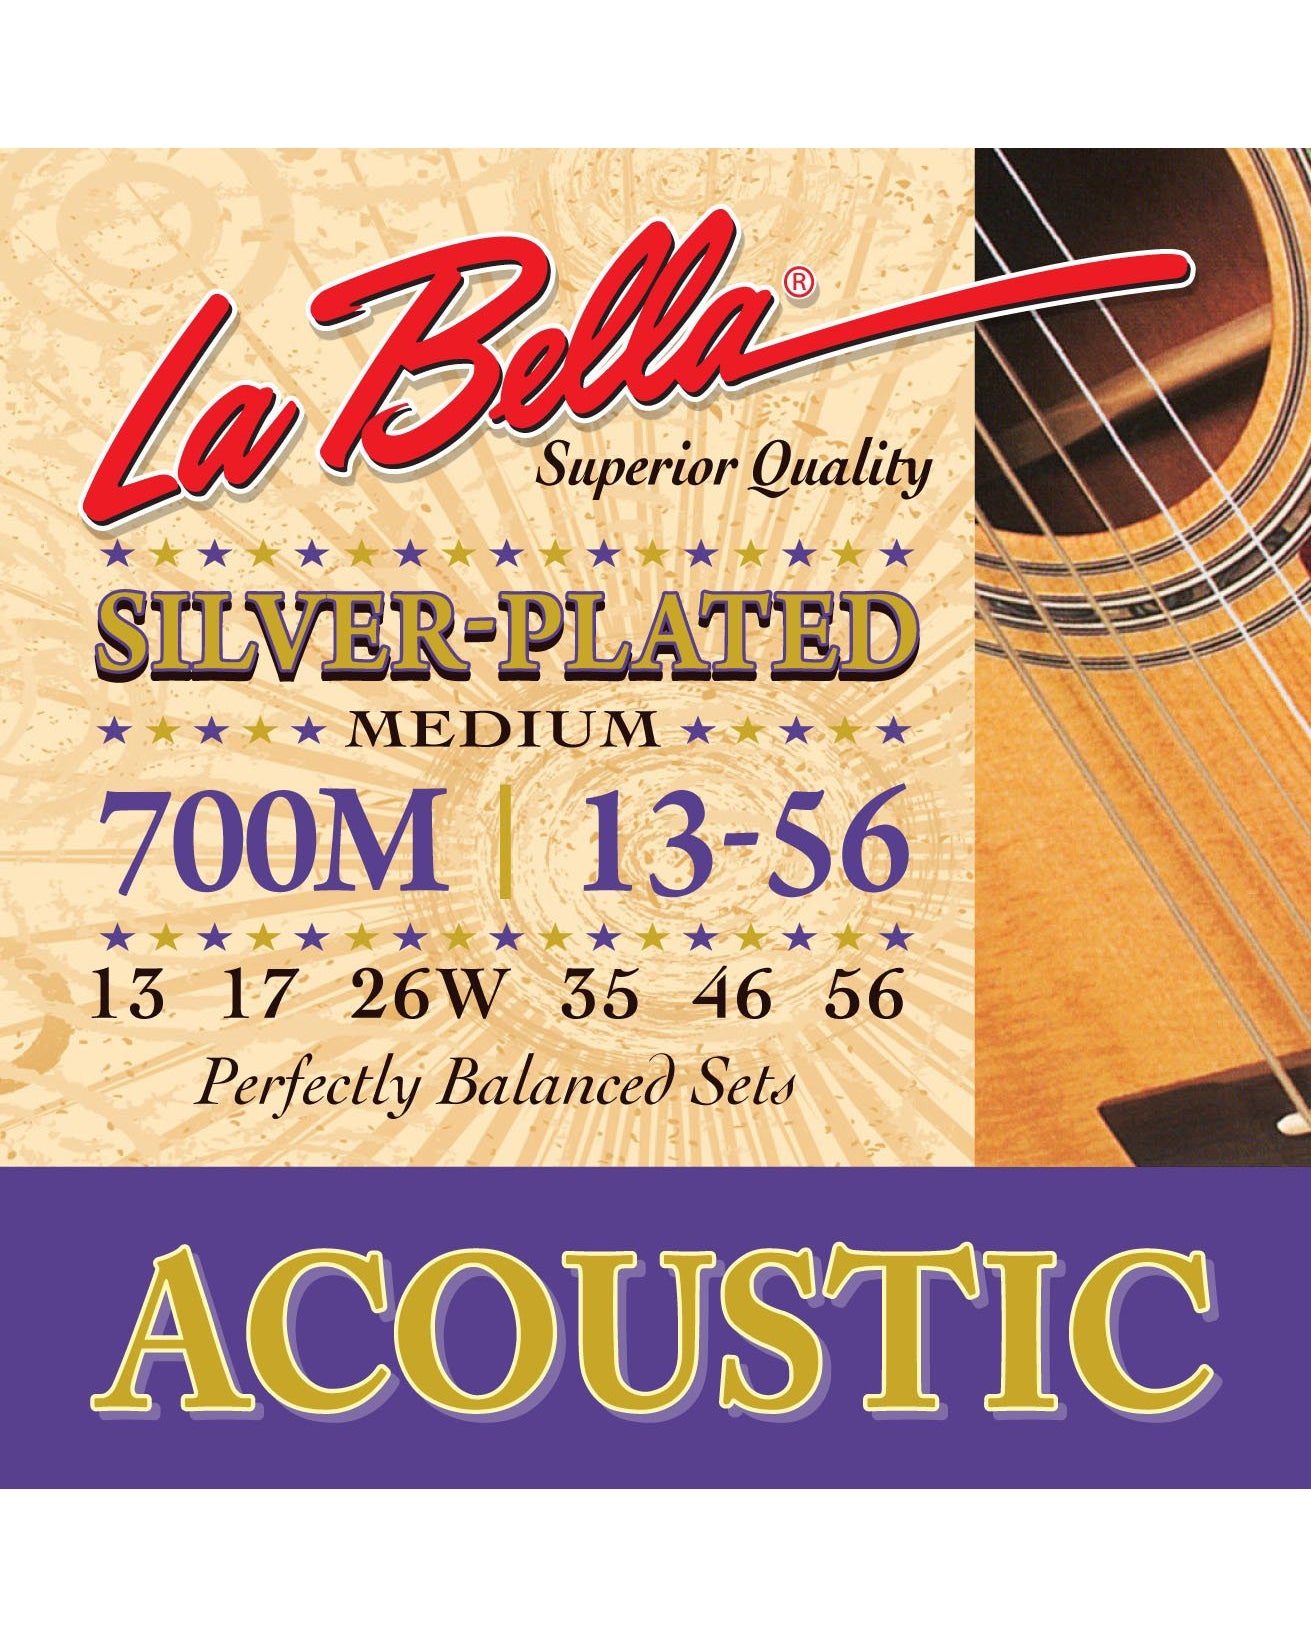 FAQ: Guitar String Types and Gauges